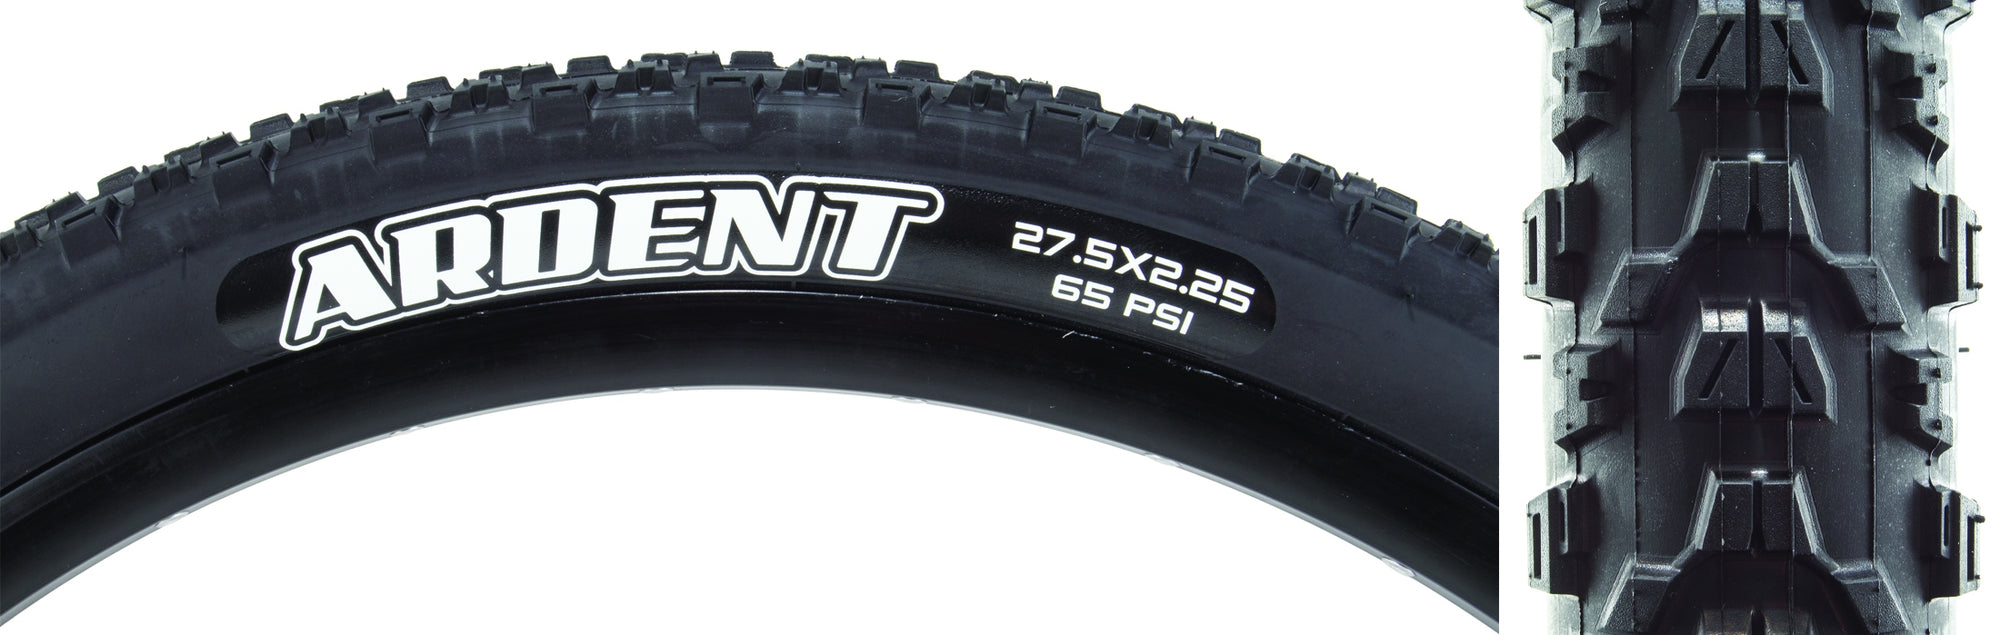 Maxxis Ardent Tire - 27.5 x 2.25 - Downtown Bicycle Works 